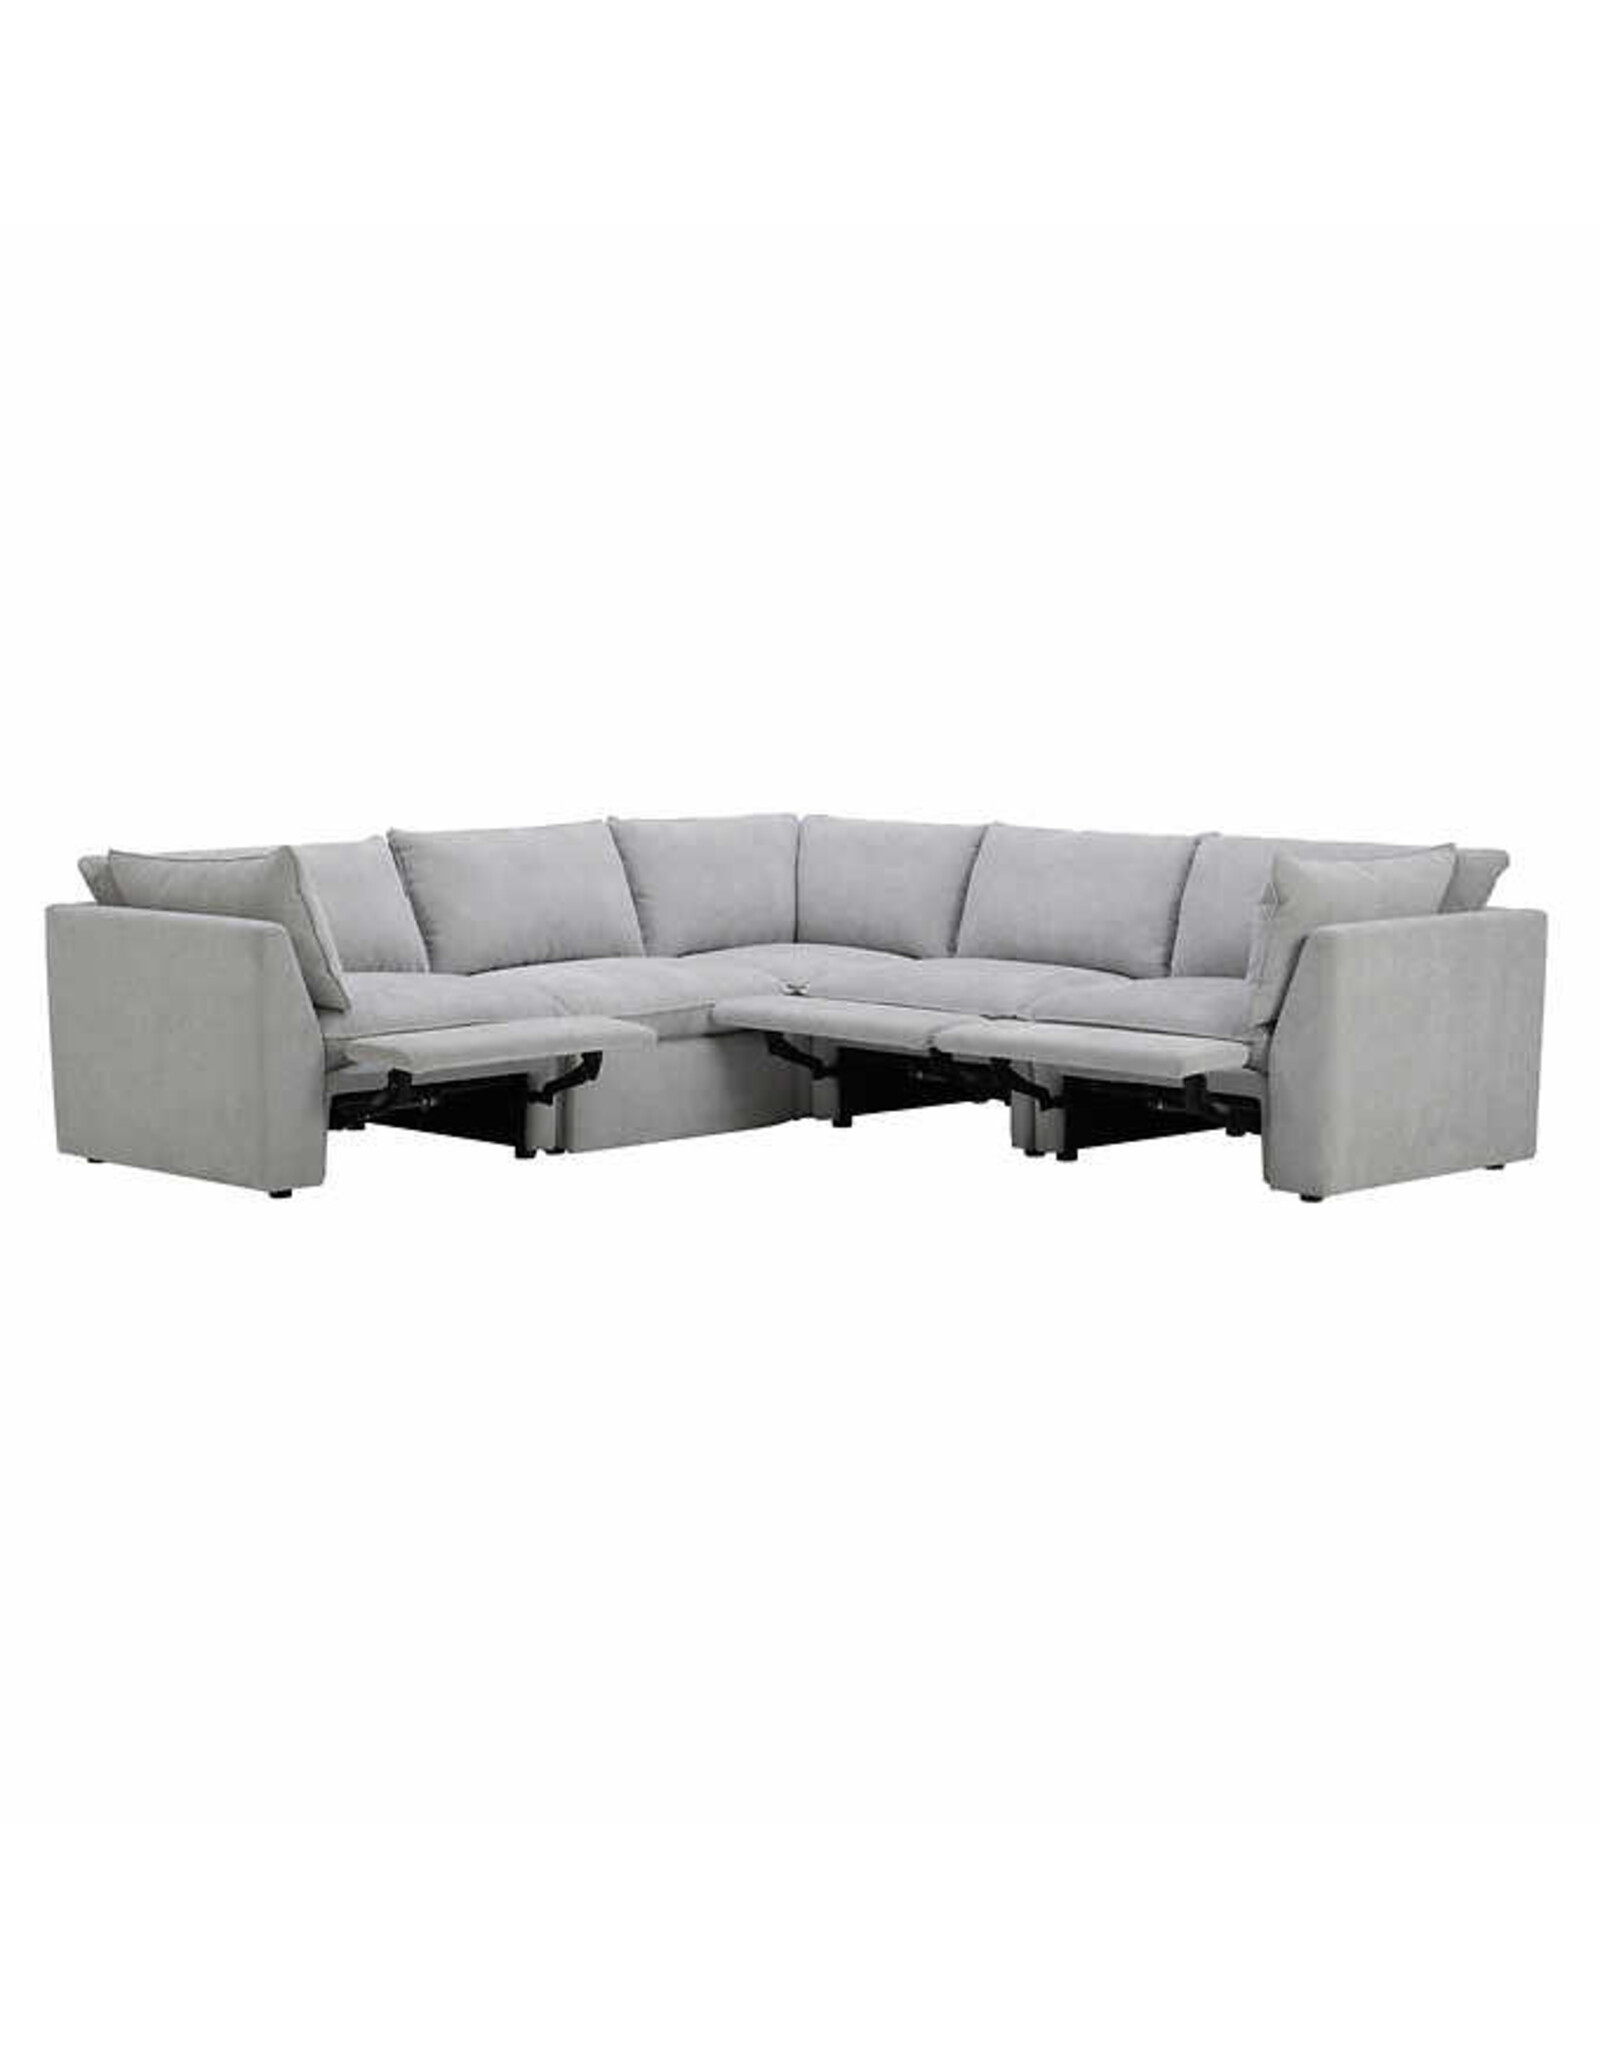 GILMAN CREEK FURNITURE 1653295 Harwood 5-piece Fabric Modular Sectional with Power Footrest